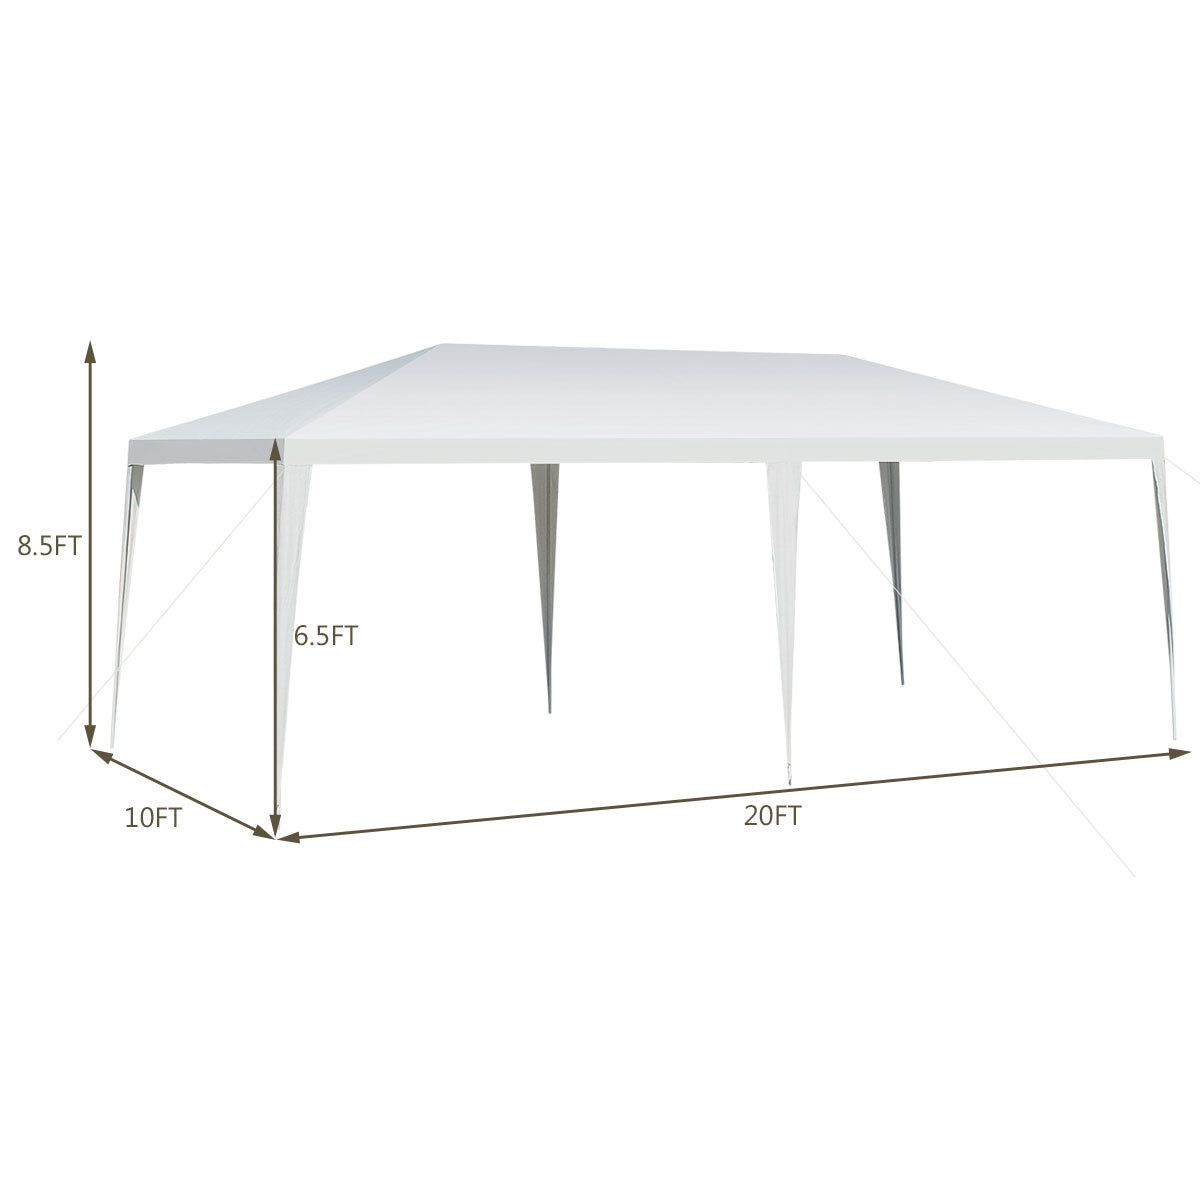 Spacious and Versatile: With a generous size of 10' x 20', our canopy tent offers ample space to accommodate large groups of people. Whether it's for weddings, picnics, BBQs, or commercial activities such as flea markets or fruit markets, this versatile party tent is the perfect choice.